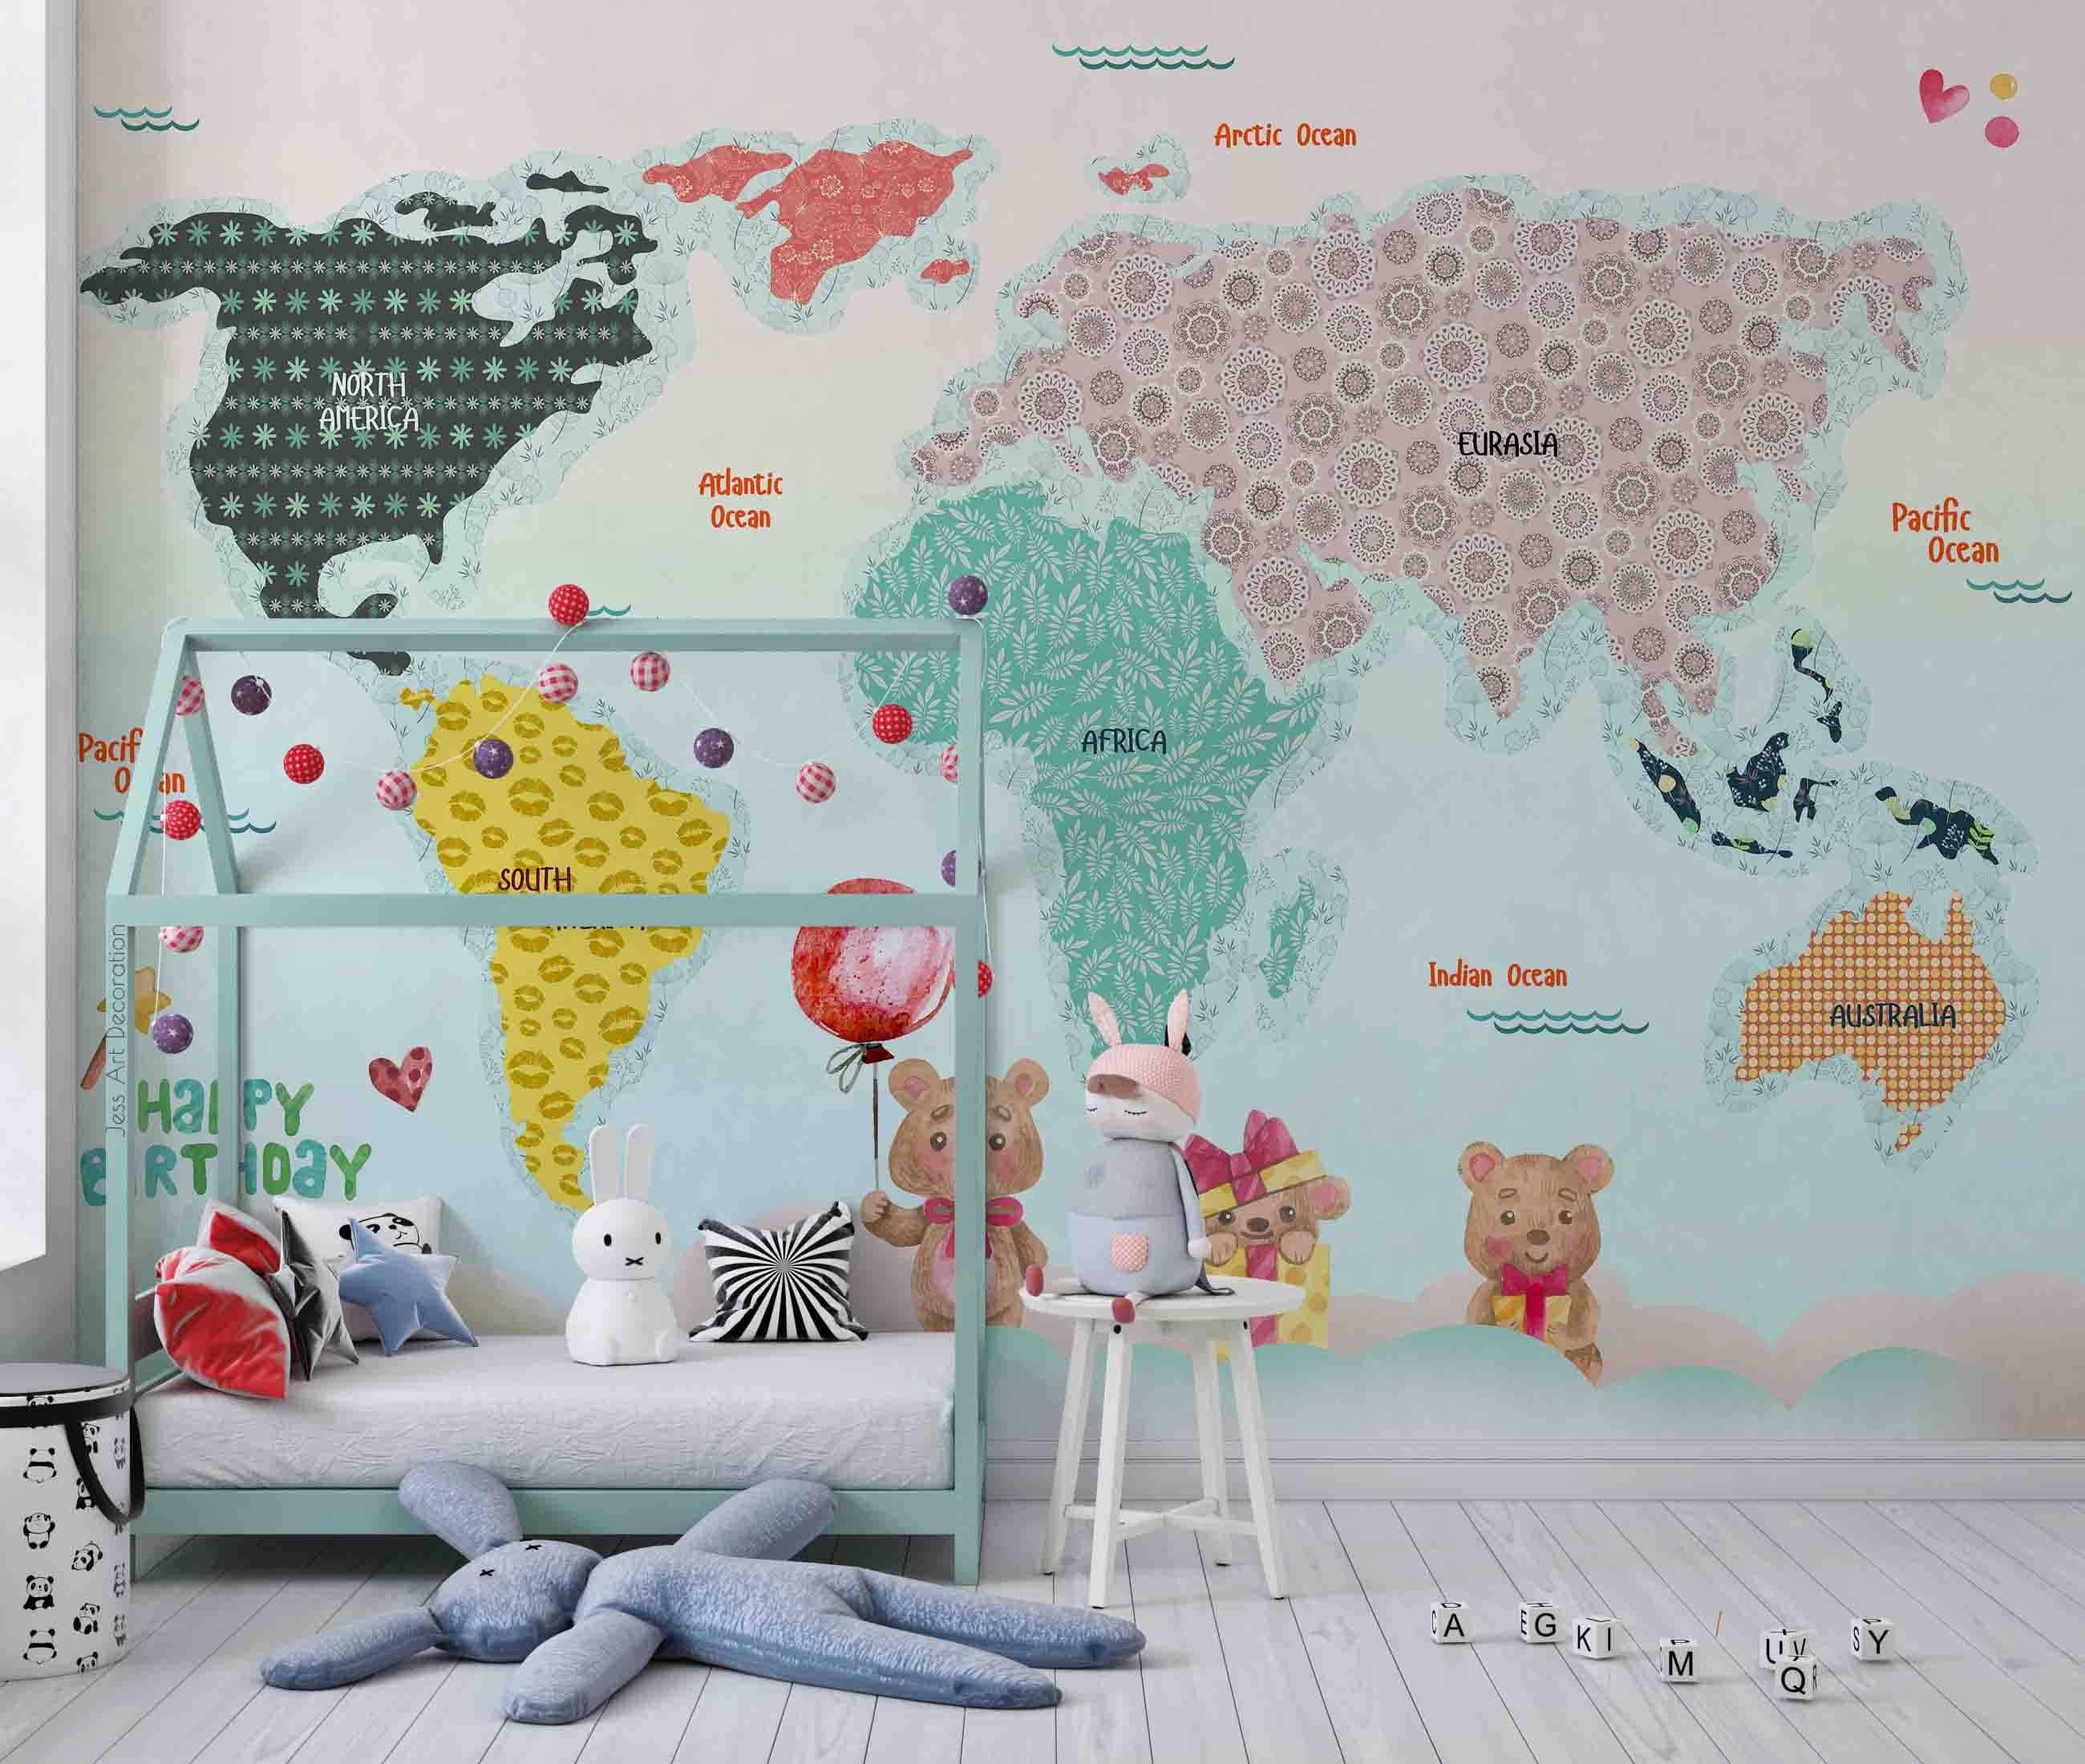 3D Abstract Colorful World Map Pattern Wall Mural Wallpaper GD 3349- Jess Art Decoration